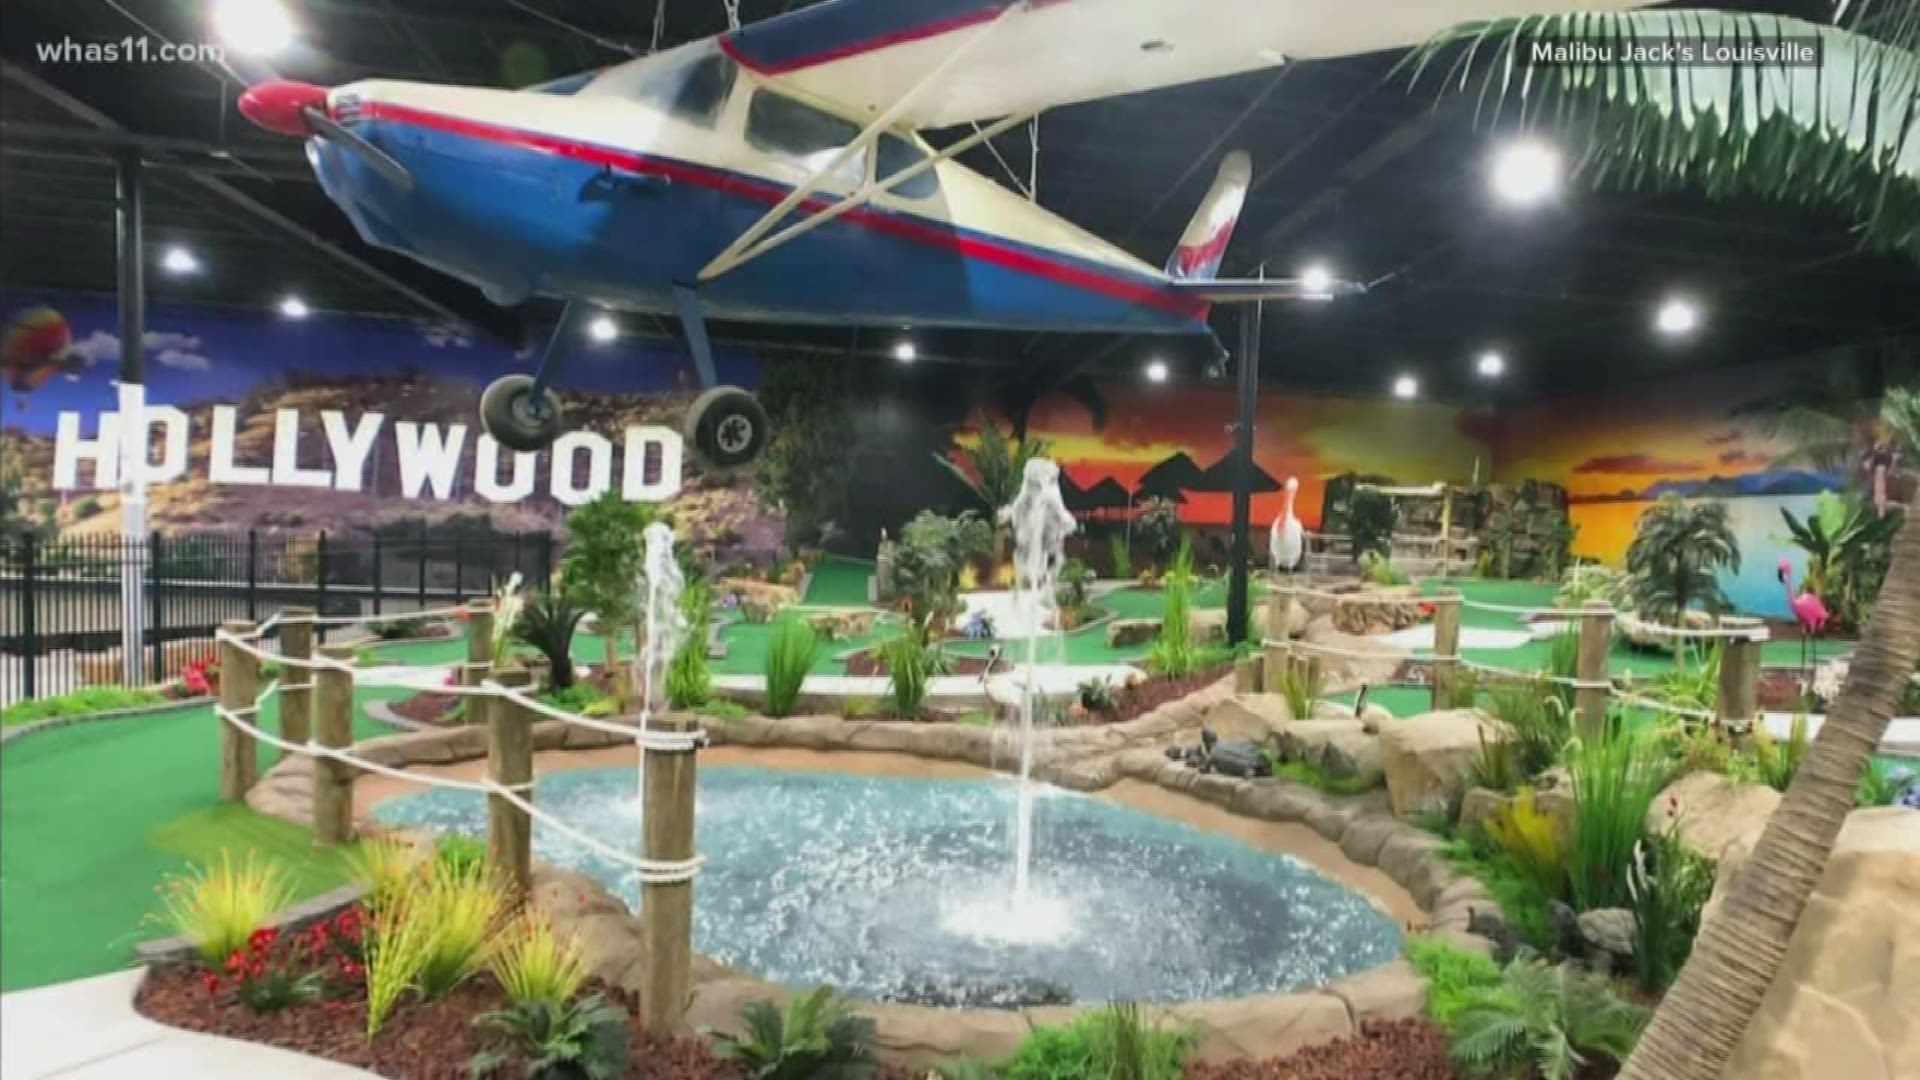 The new theme park has rides, bowling, a new mini golf course, virtual reality, go karts, and laser tag.